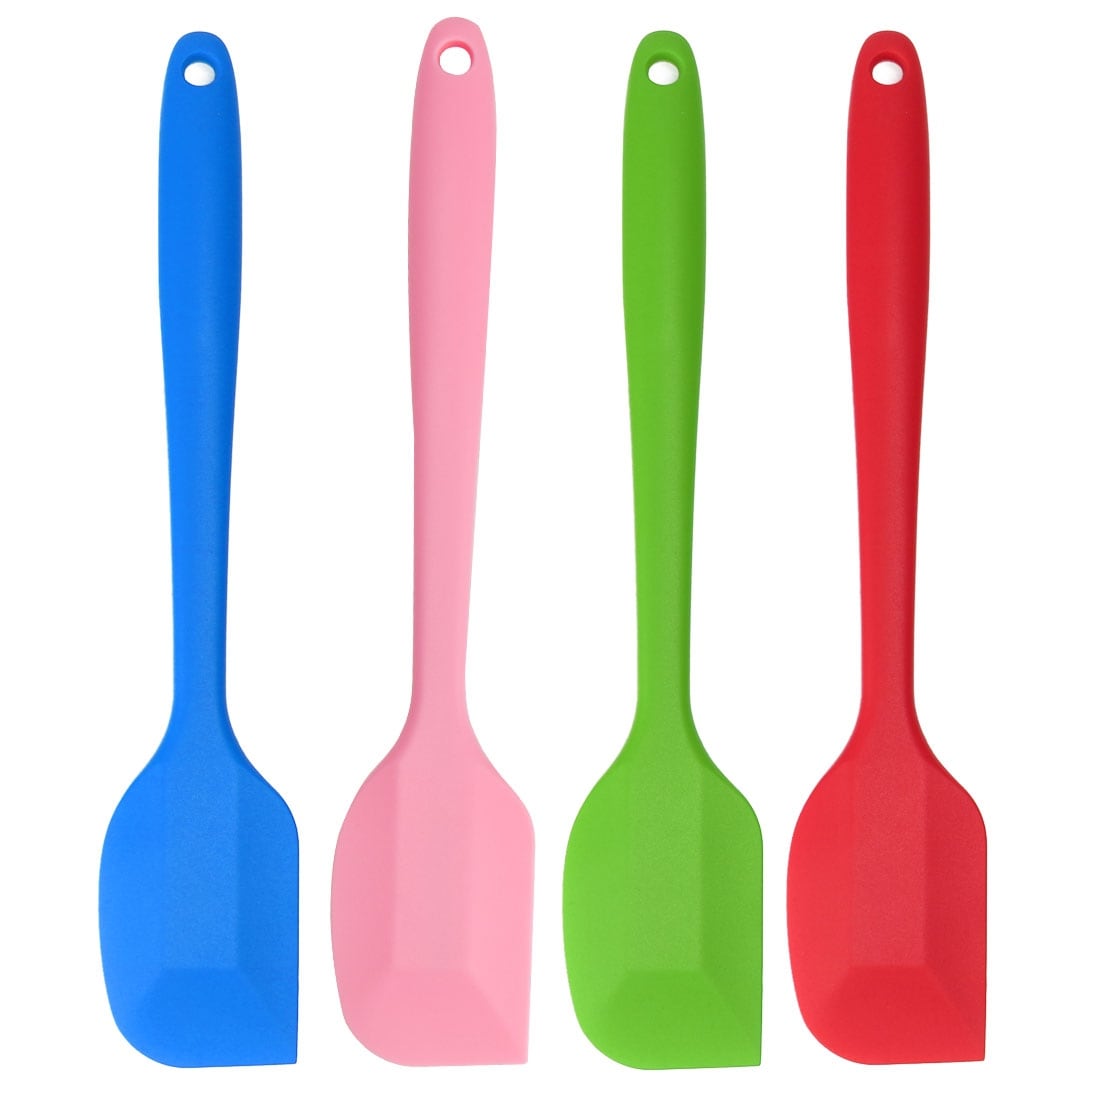 https://ak1.ostkcdn.com/images/products/is/images/direct/989ecf54b575e09c09a4bcfdd928e7b62ba38afe/Silicone-Spatula-Heat-Resistant-Non-Stick-for-Kitchen-Cooking-Baking.jpg